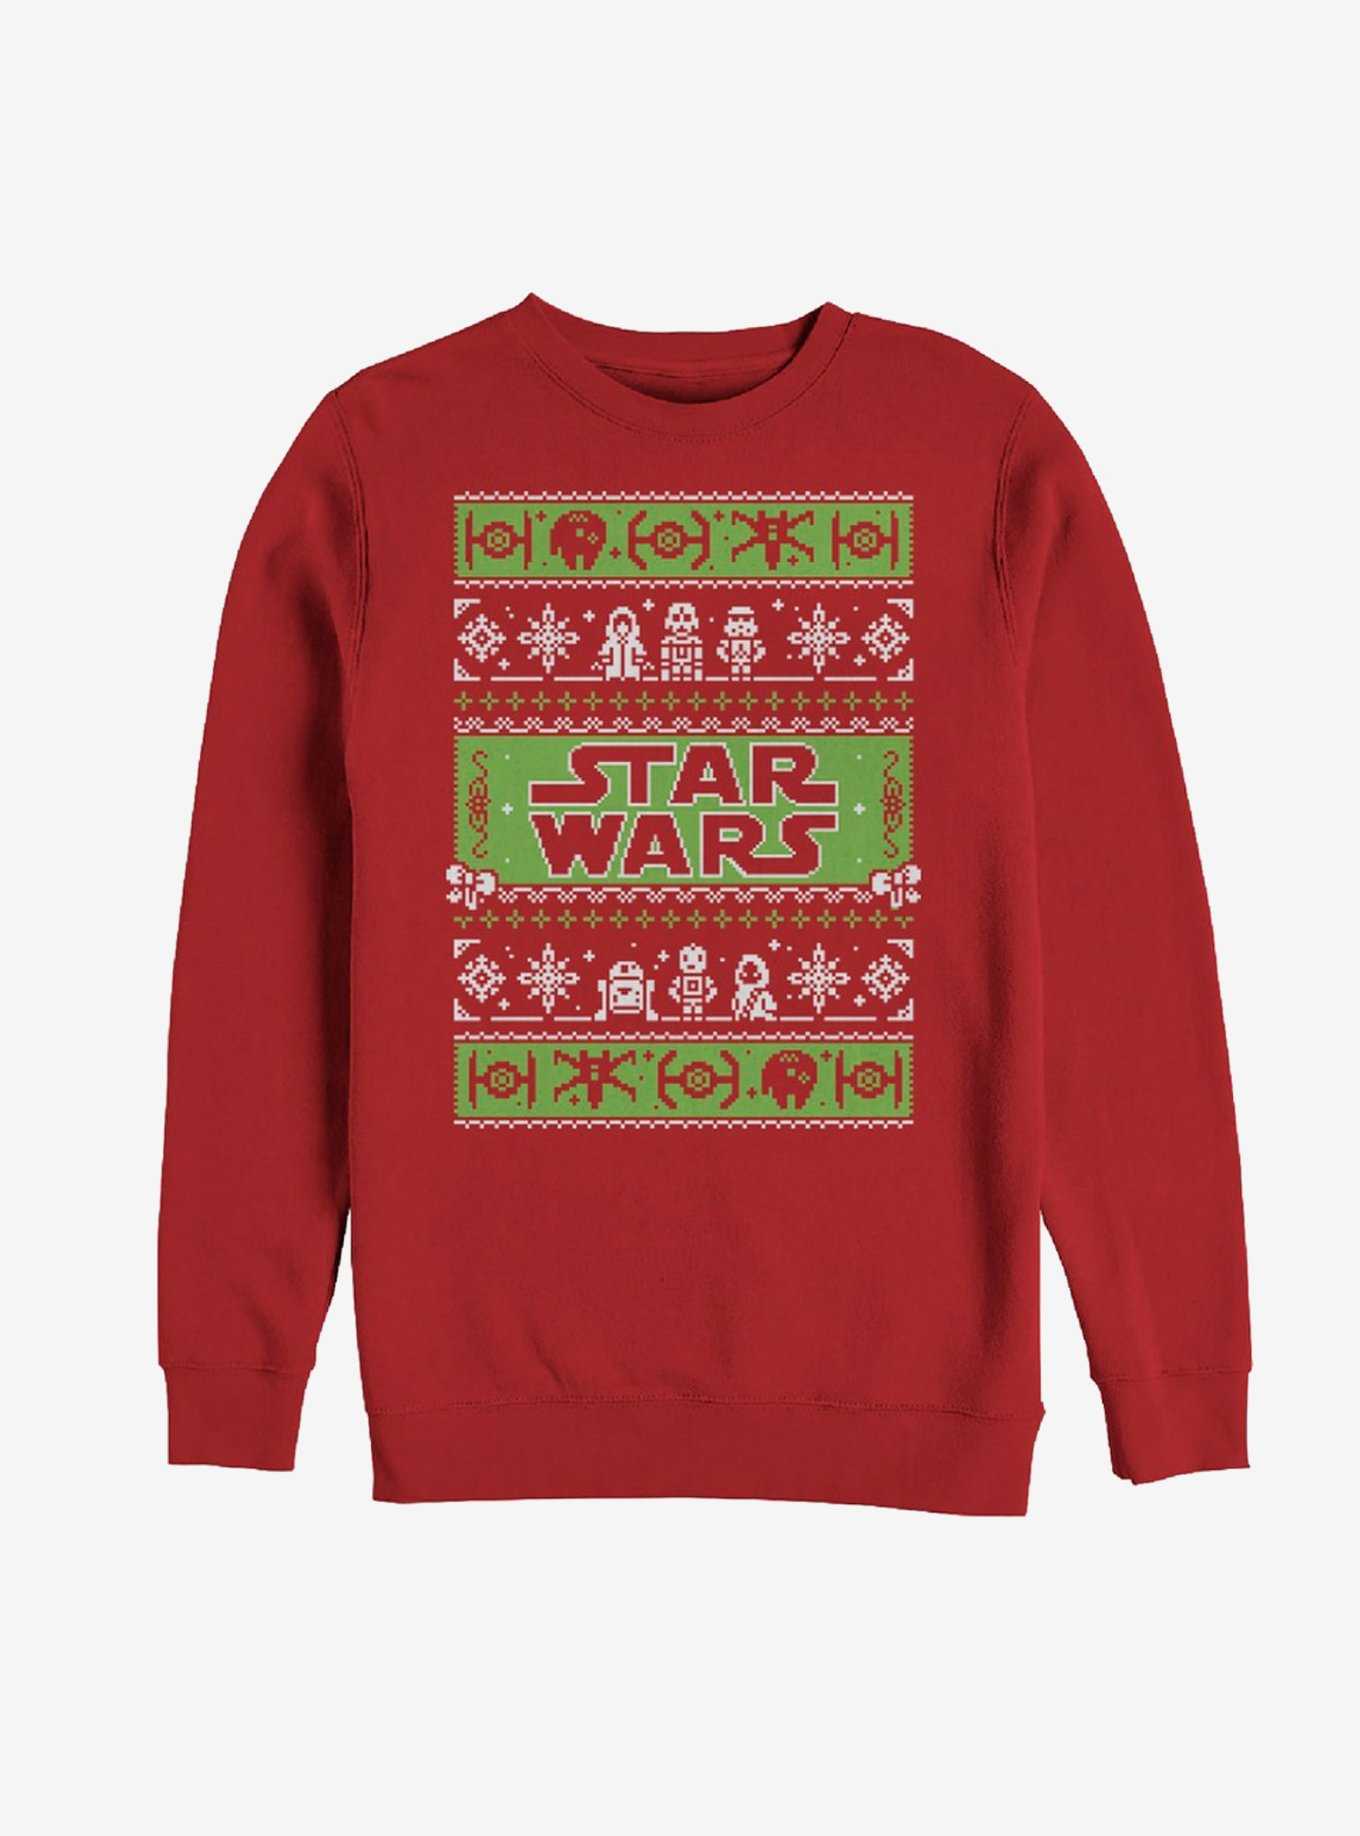 Star Wars Ugly Christmas Sweater Come to the Merry Side Girls Sweatshirt, , hi-res